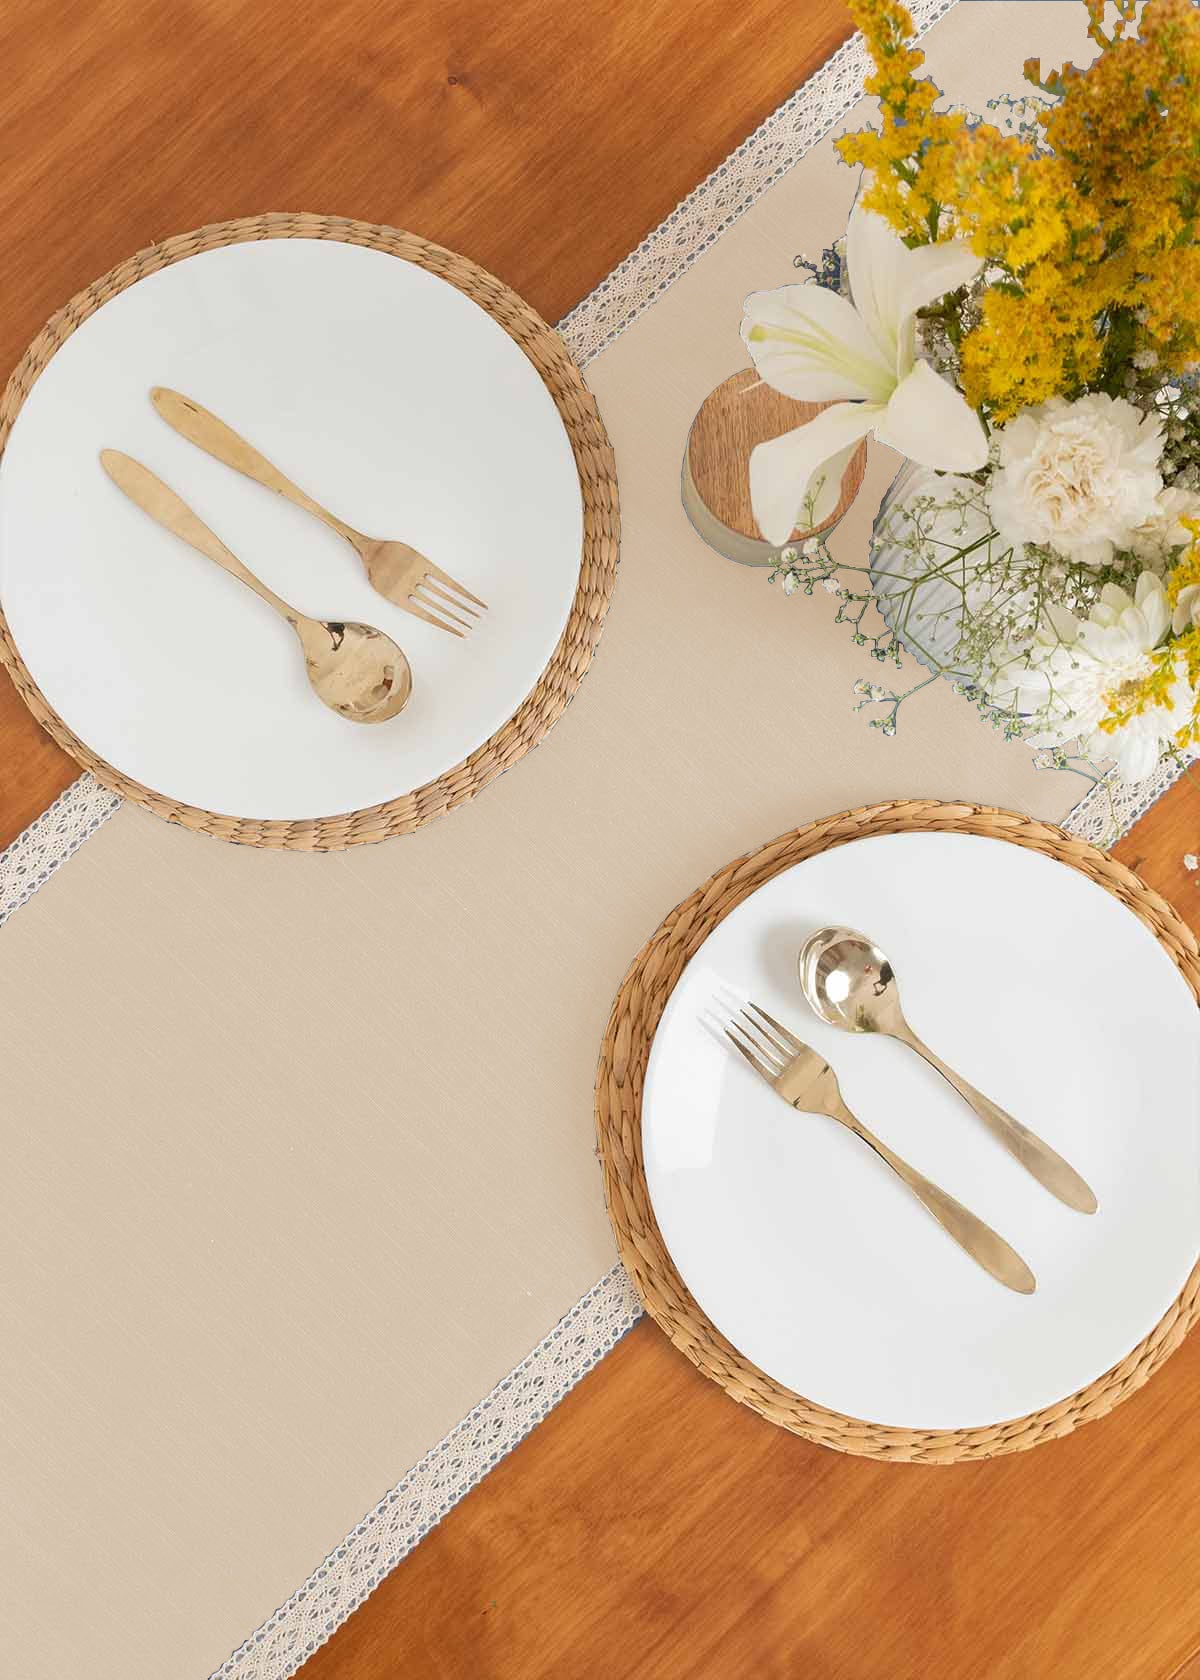 Solid Cream 100% cotton plain table runner for 4 seater or 6 seater dining with lace boarder - Cream